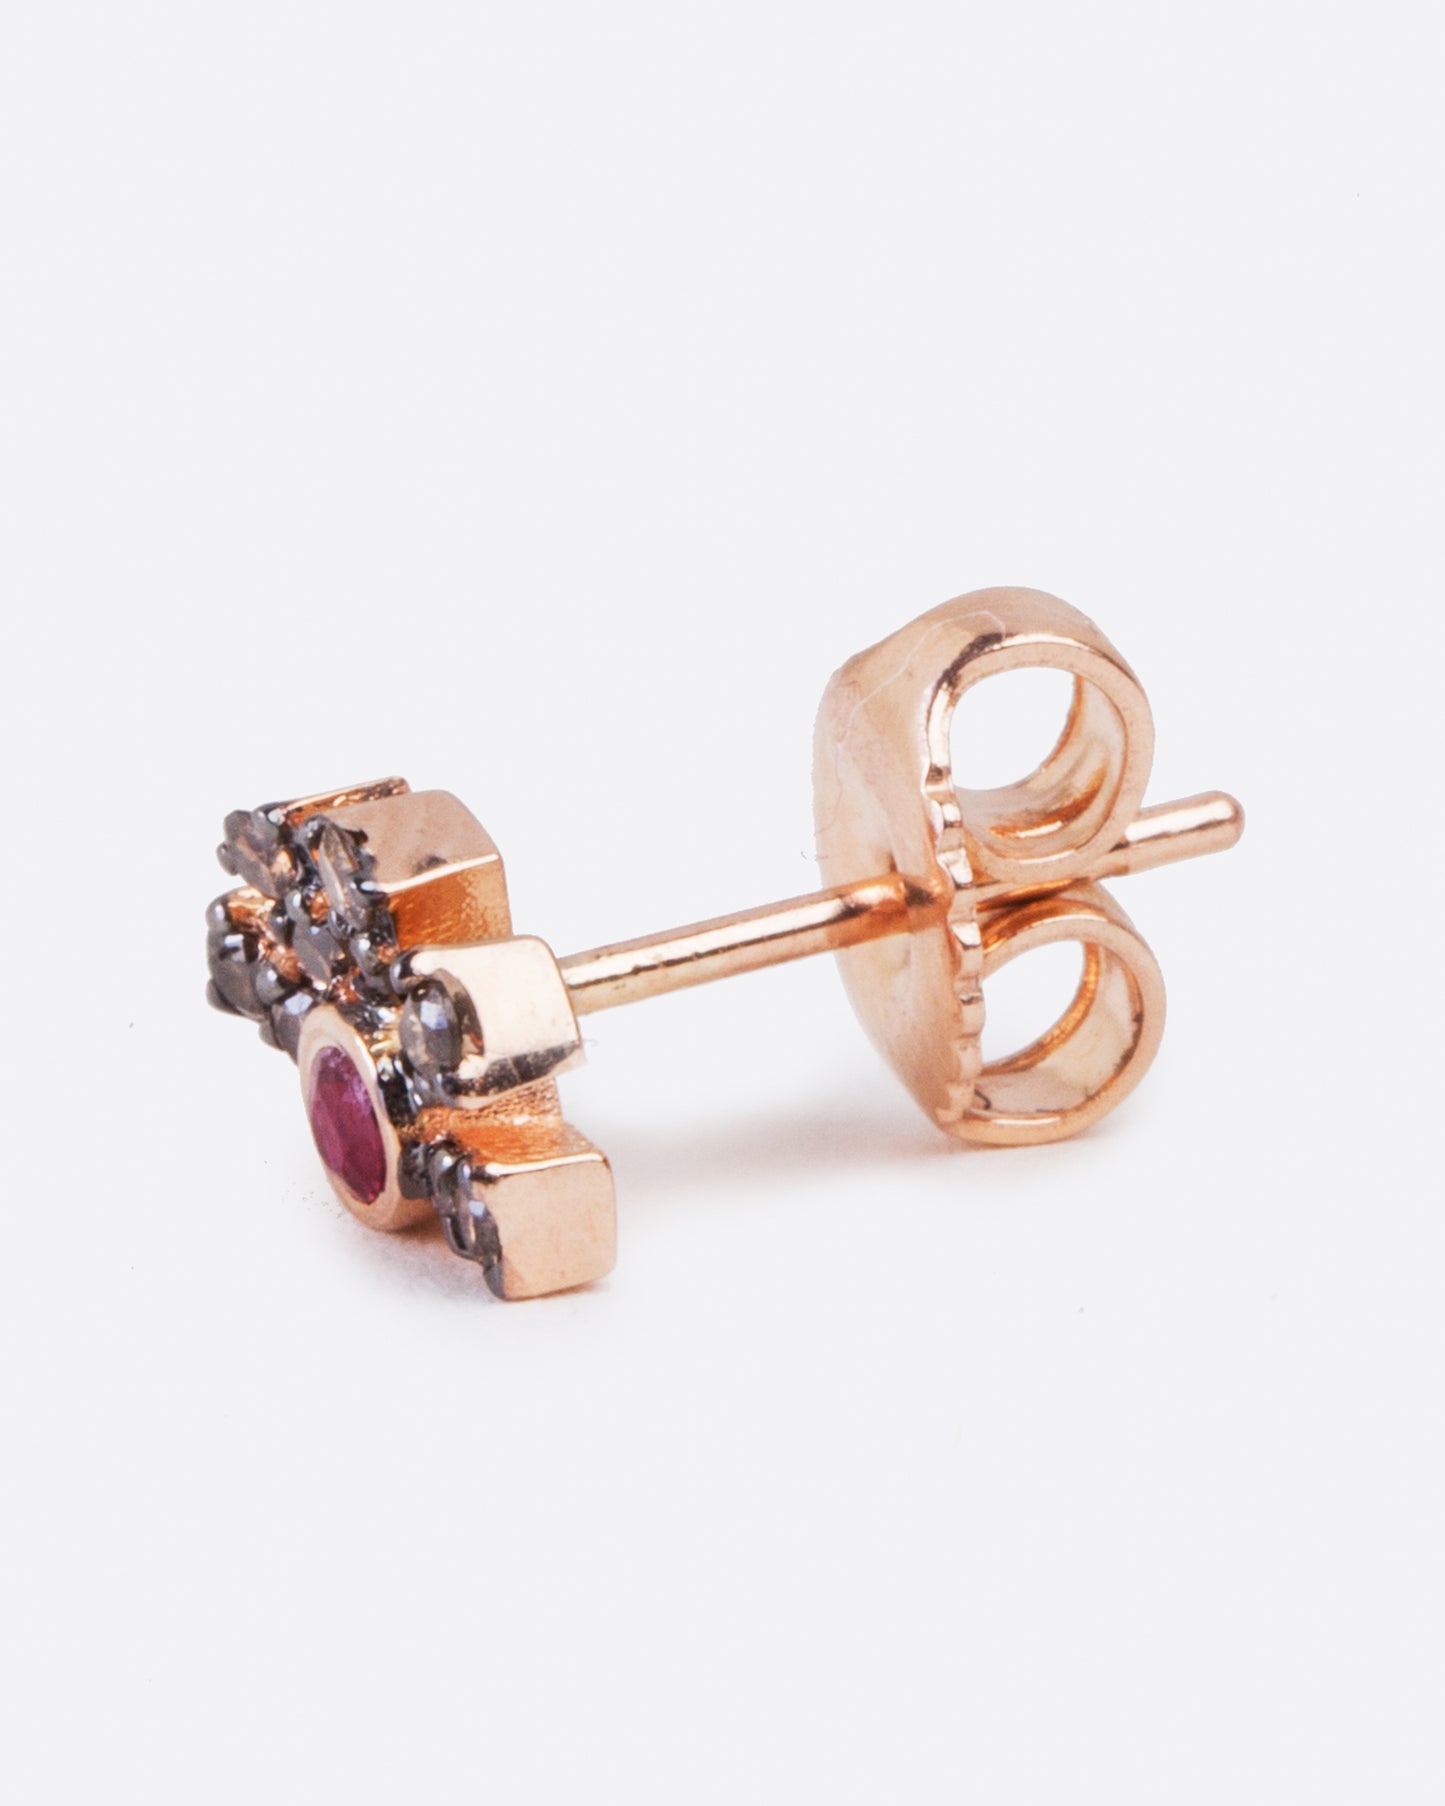 rose gold single earring with butterfly backing on post.